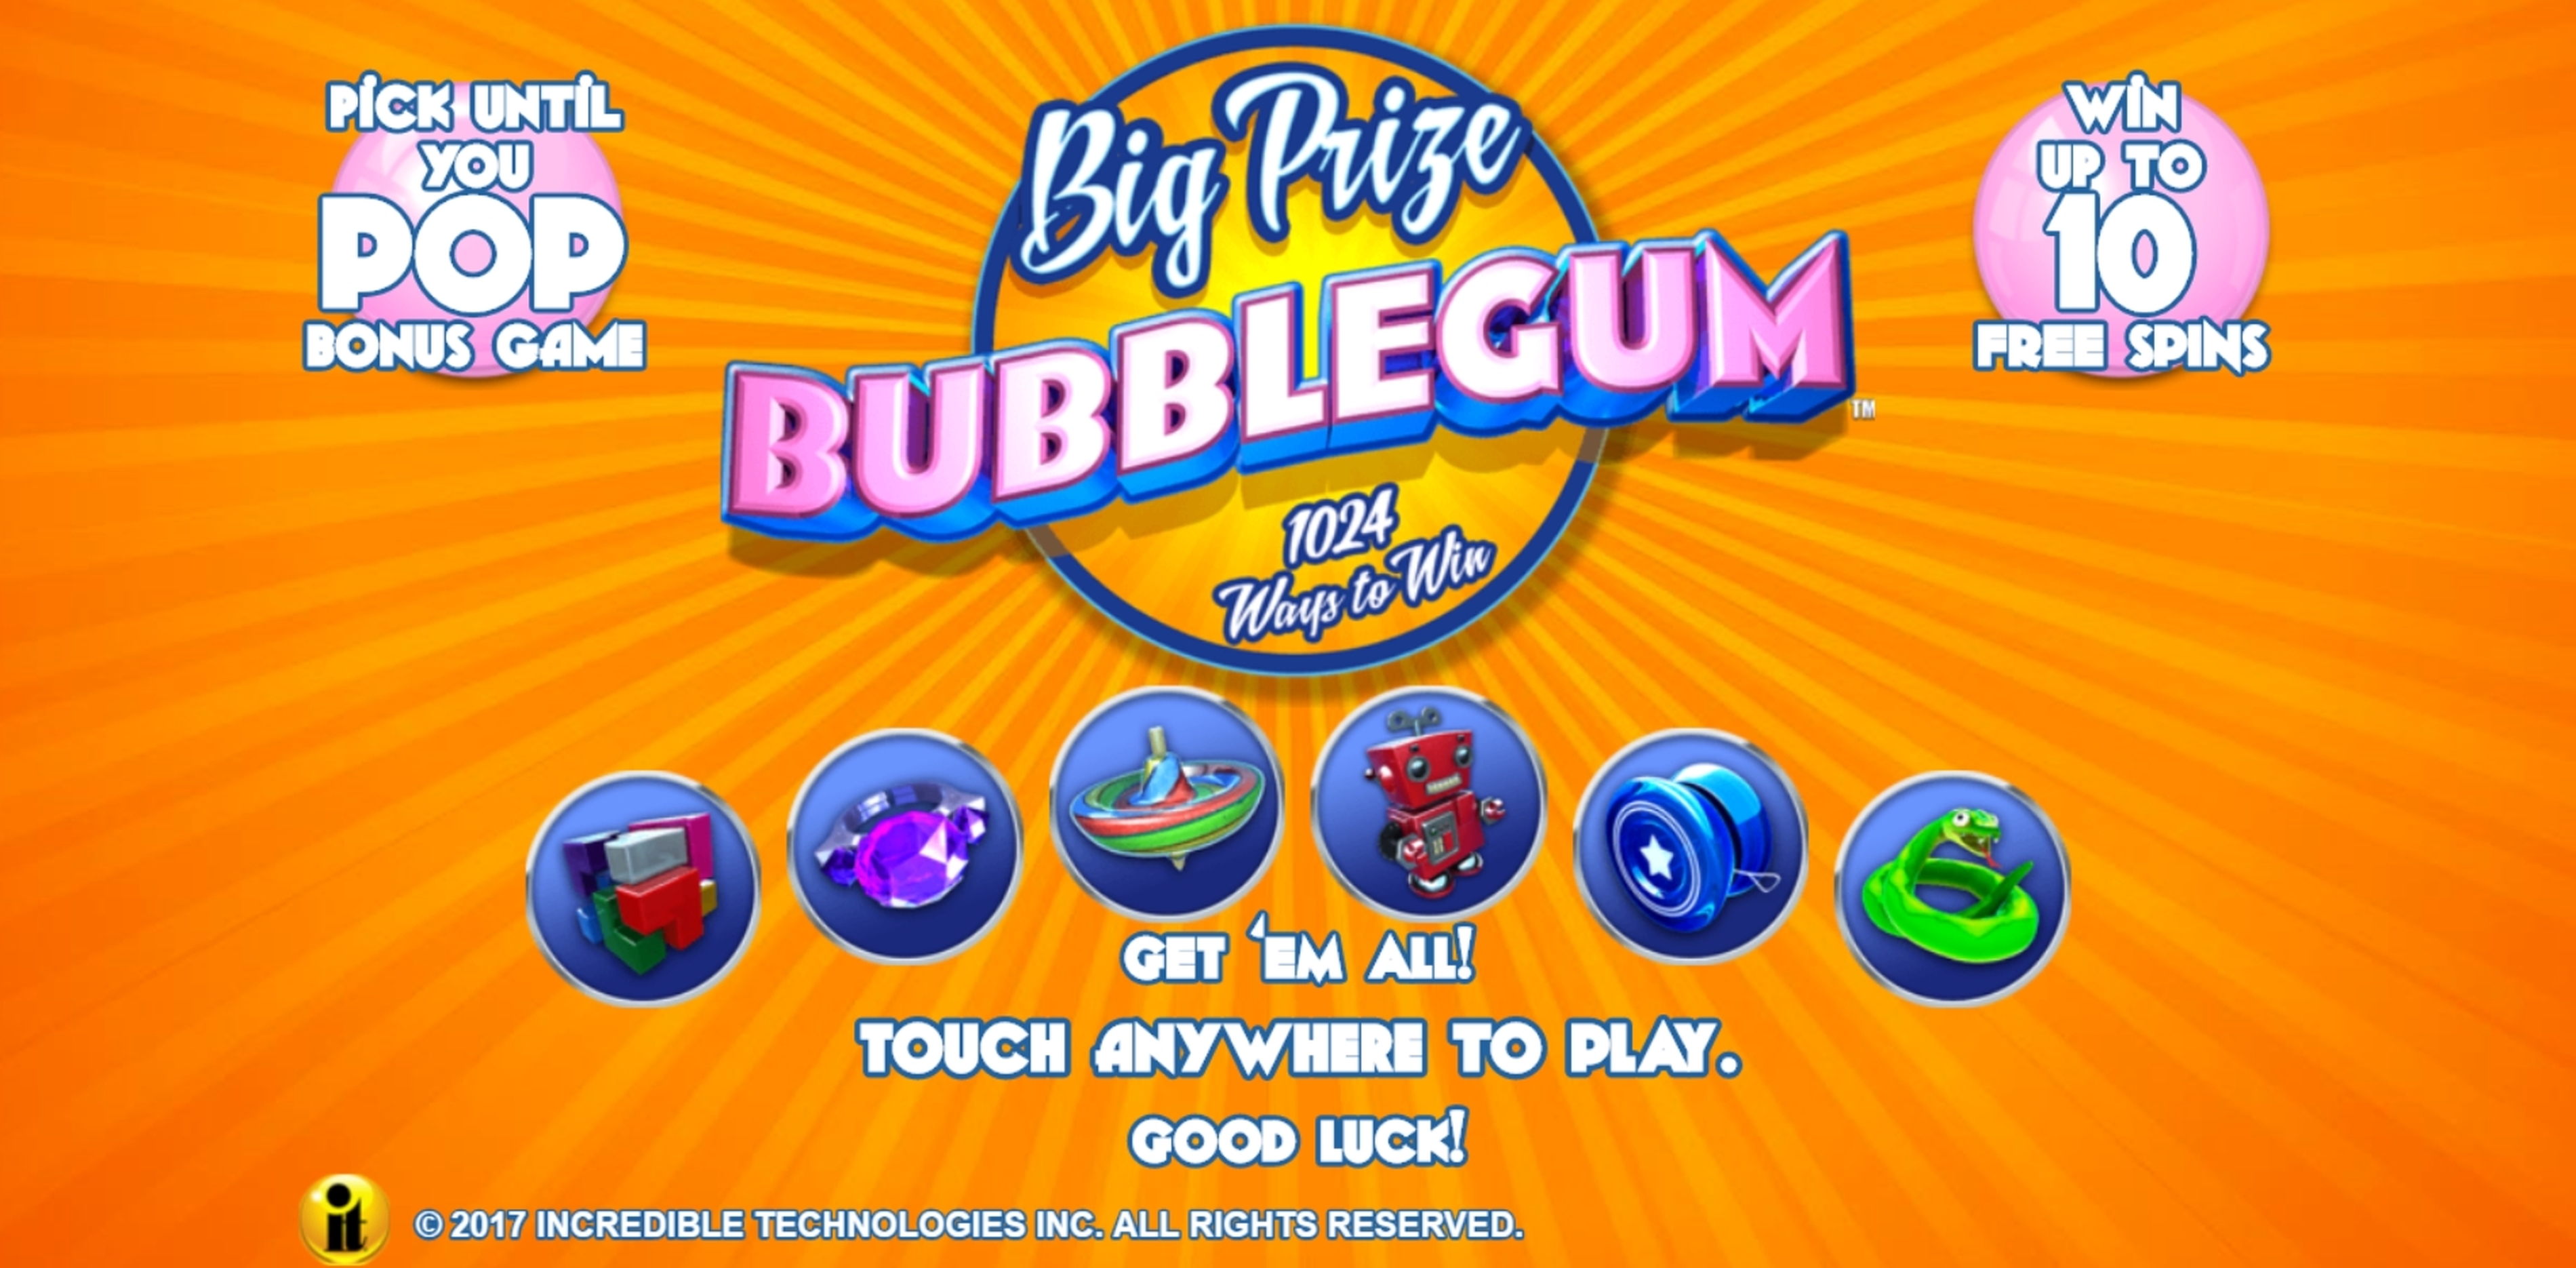 Play Big Prize Bubblegum Free Casino Slot Game by Incredible Technologies